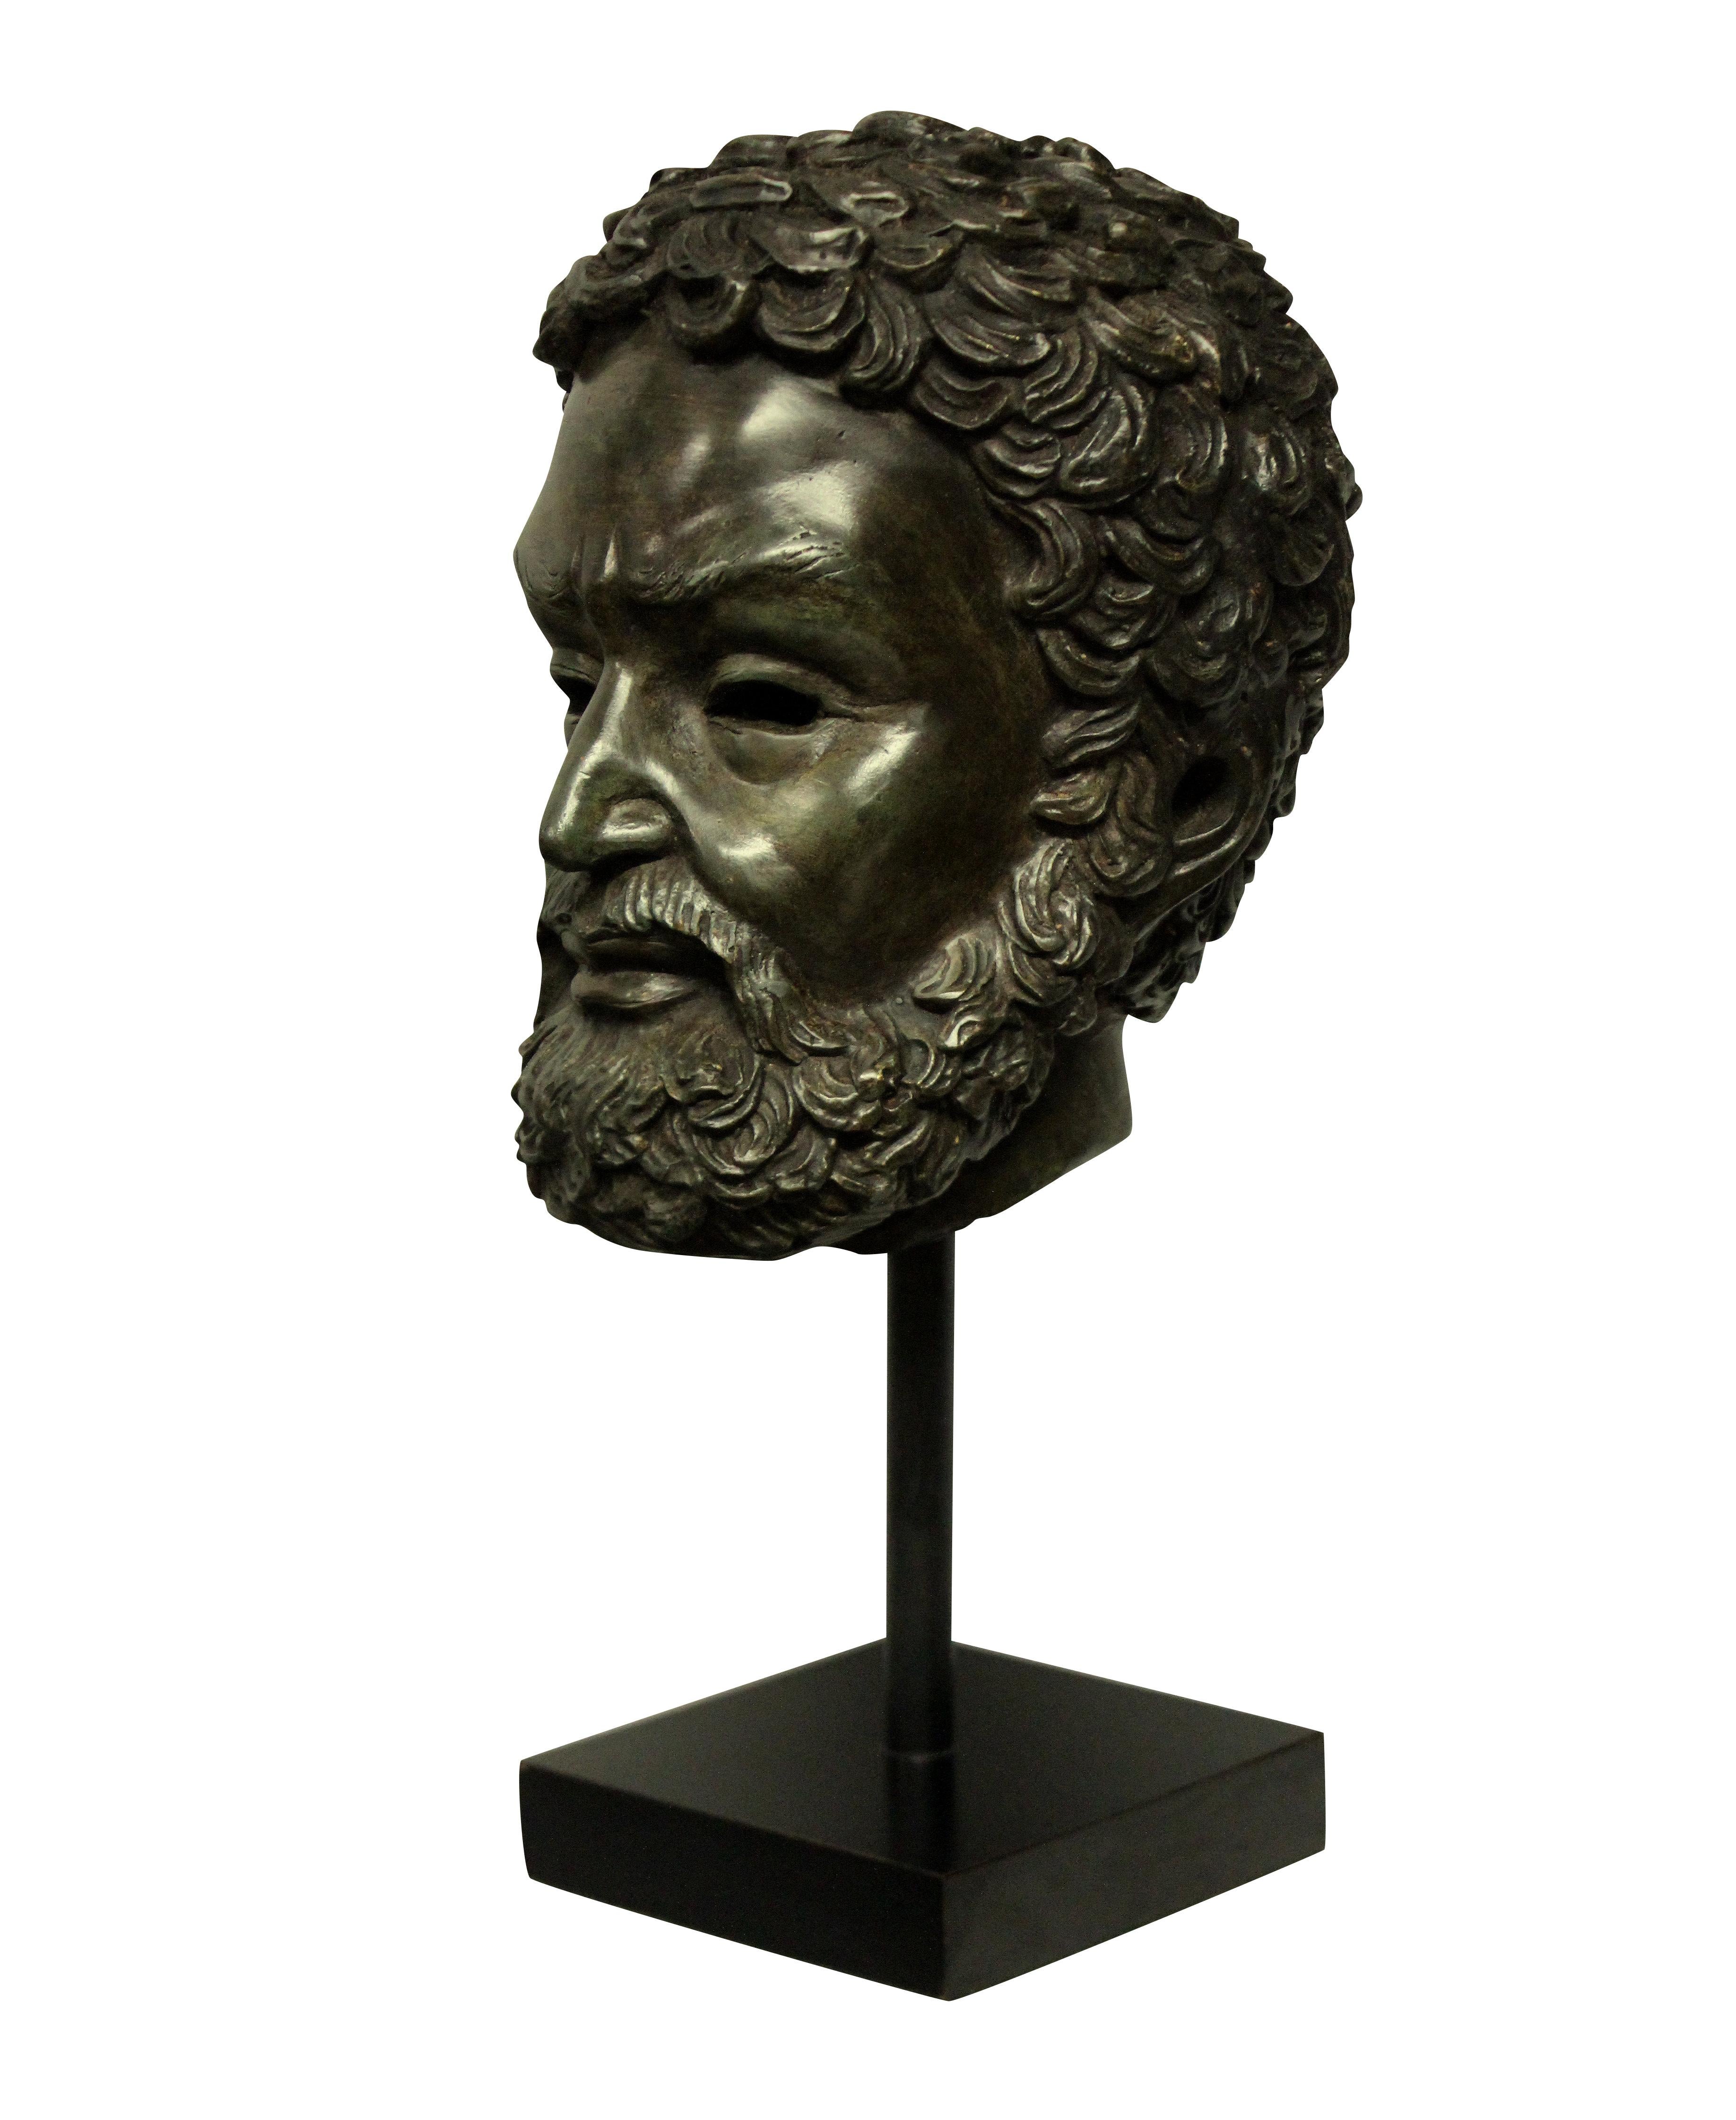 An English bronze head of Zeus, mounted on an ebonized stand.